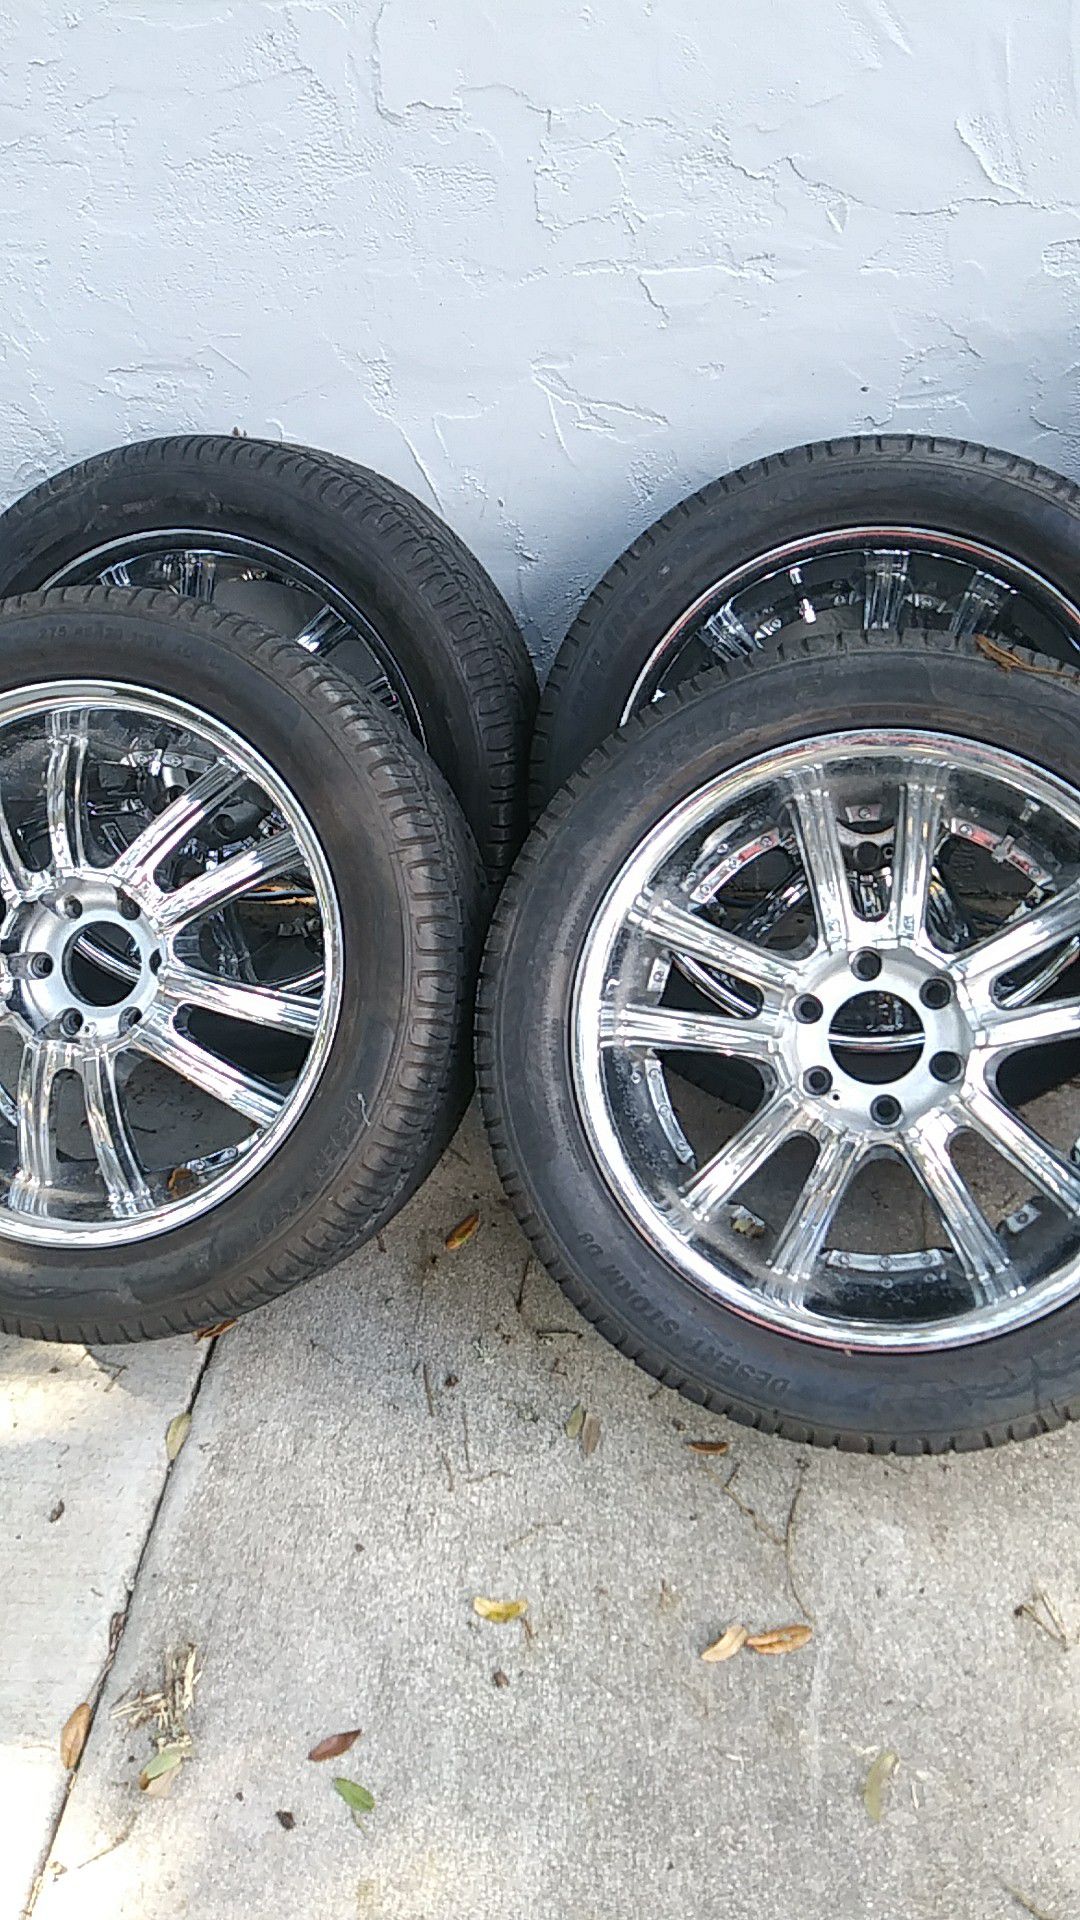 6 lugs chrome rims and tires.